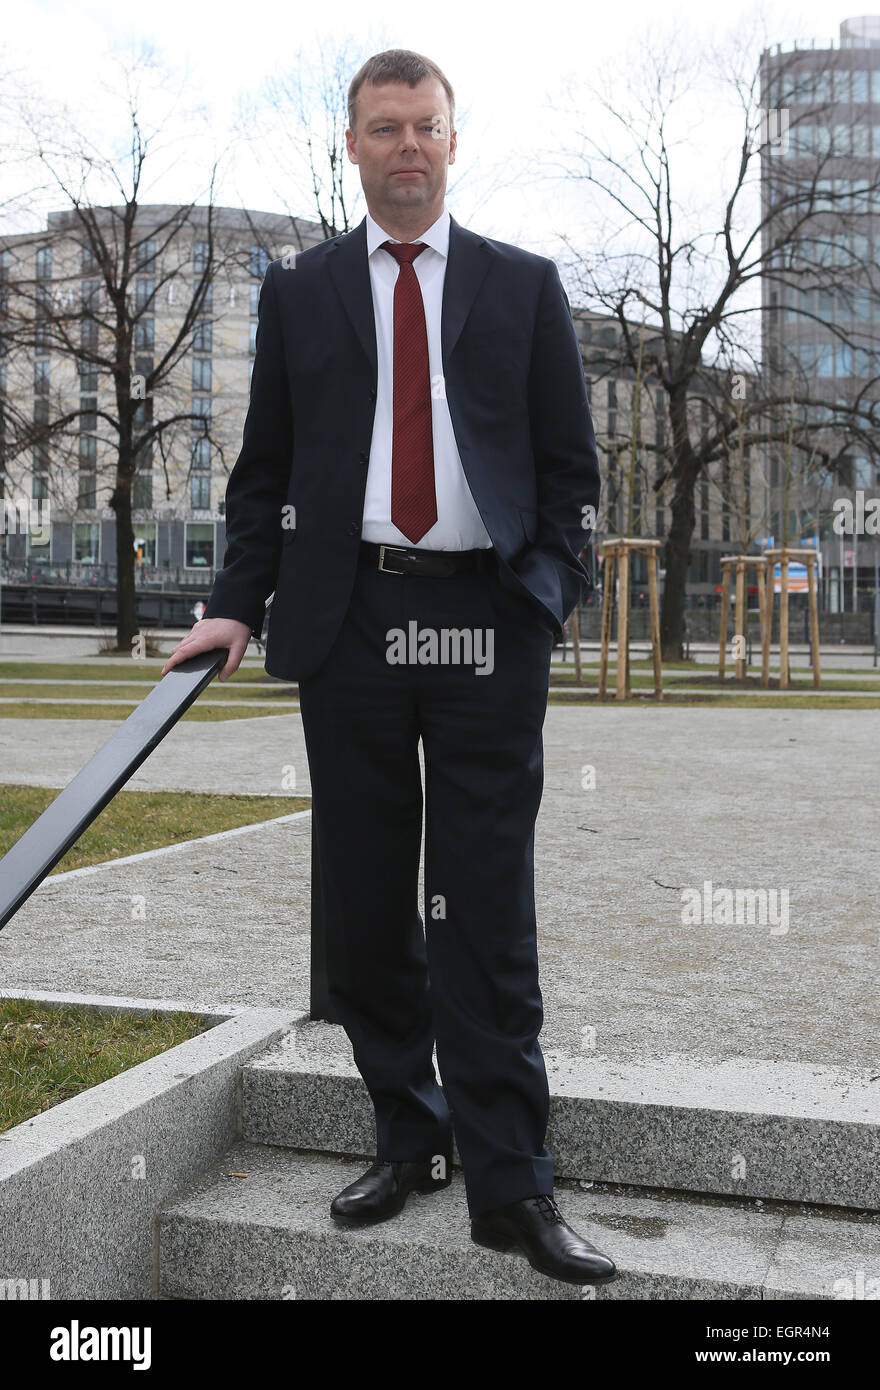 Berlin, Germany. 28th Feb, 2015. Alexander Hug, deputy chief of the OSCE Monitoring Mission to Ukraine (OSCE: Organization for Security and Co-operation in Europe) poses at an interview in Berlin, Germany, 28 February 2015. Photo: STEPHANIE PILICK/dpa/Alamy Live News Stock Photo